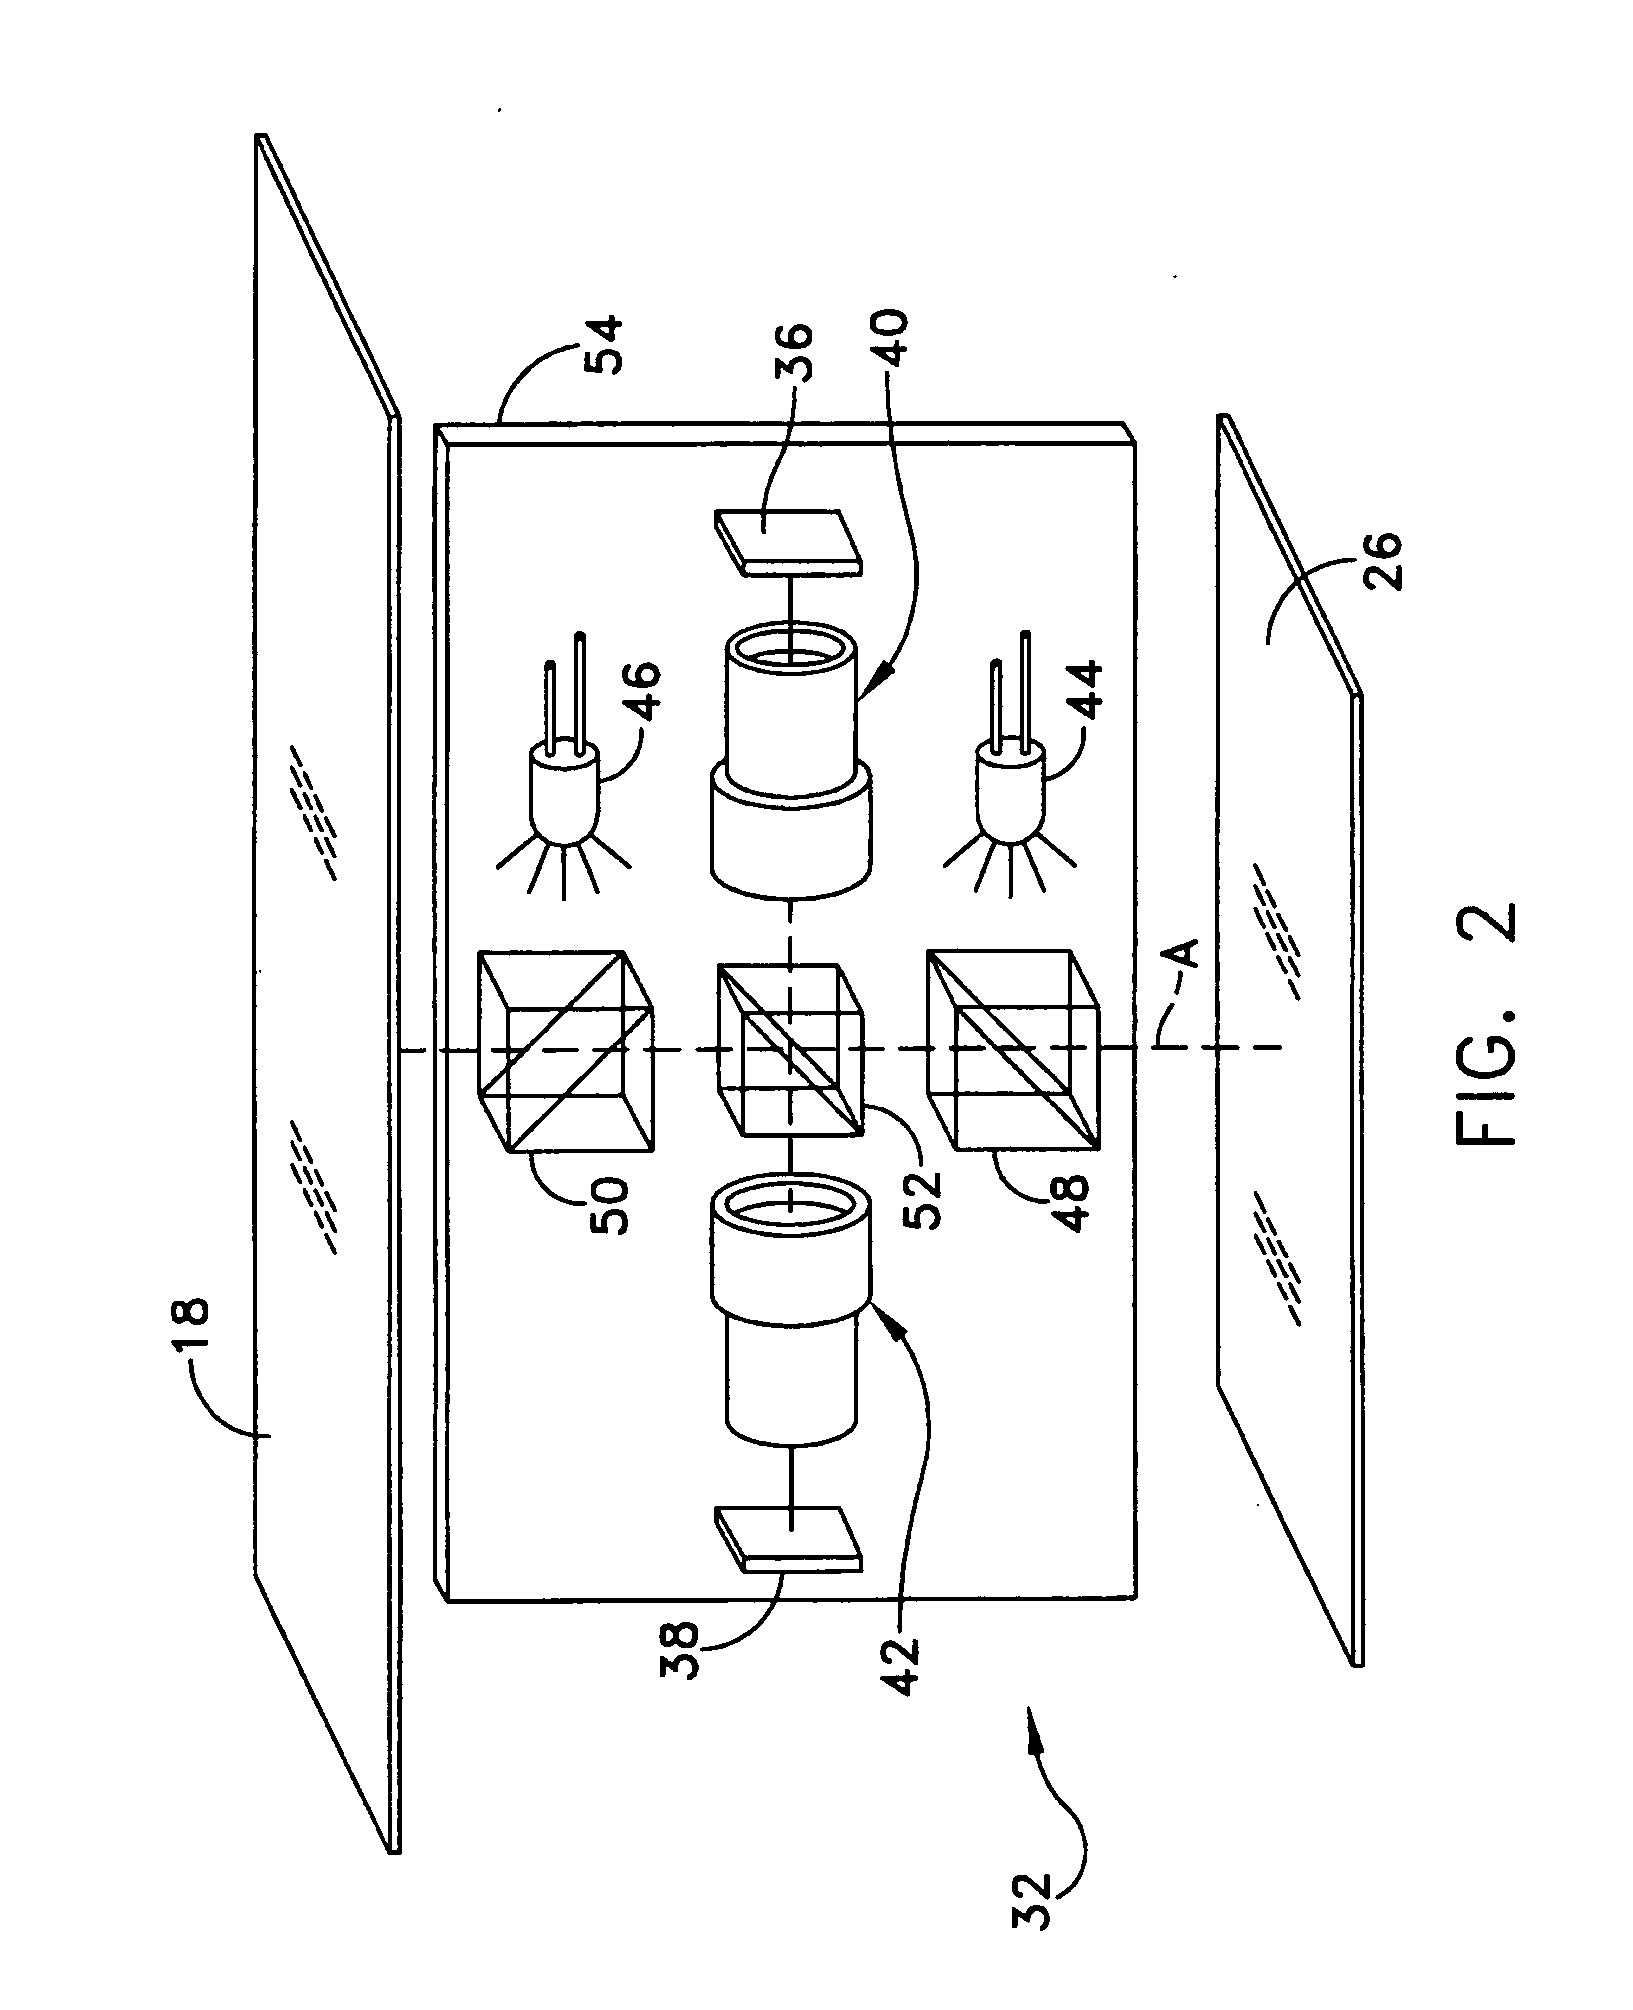 Off-axis illumination assembly and method